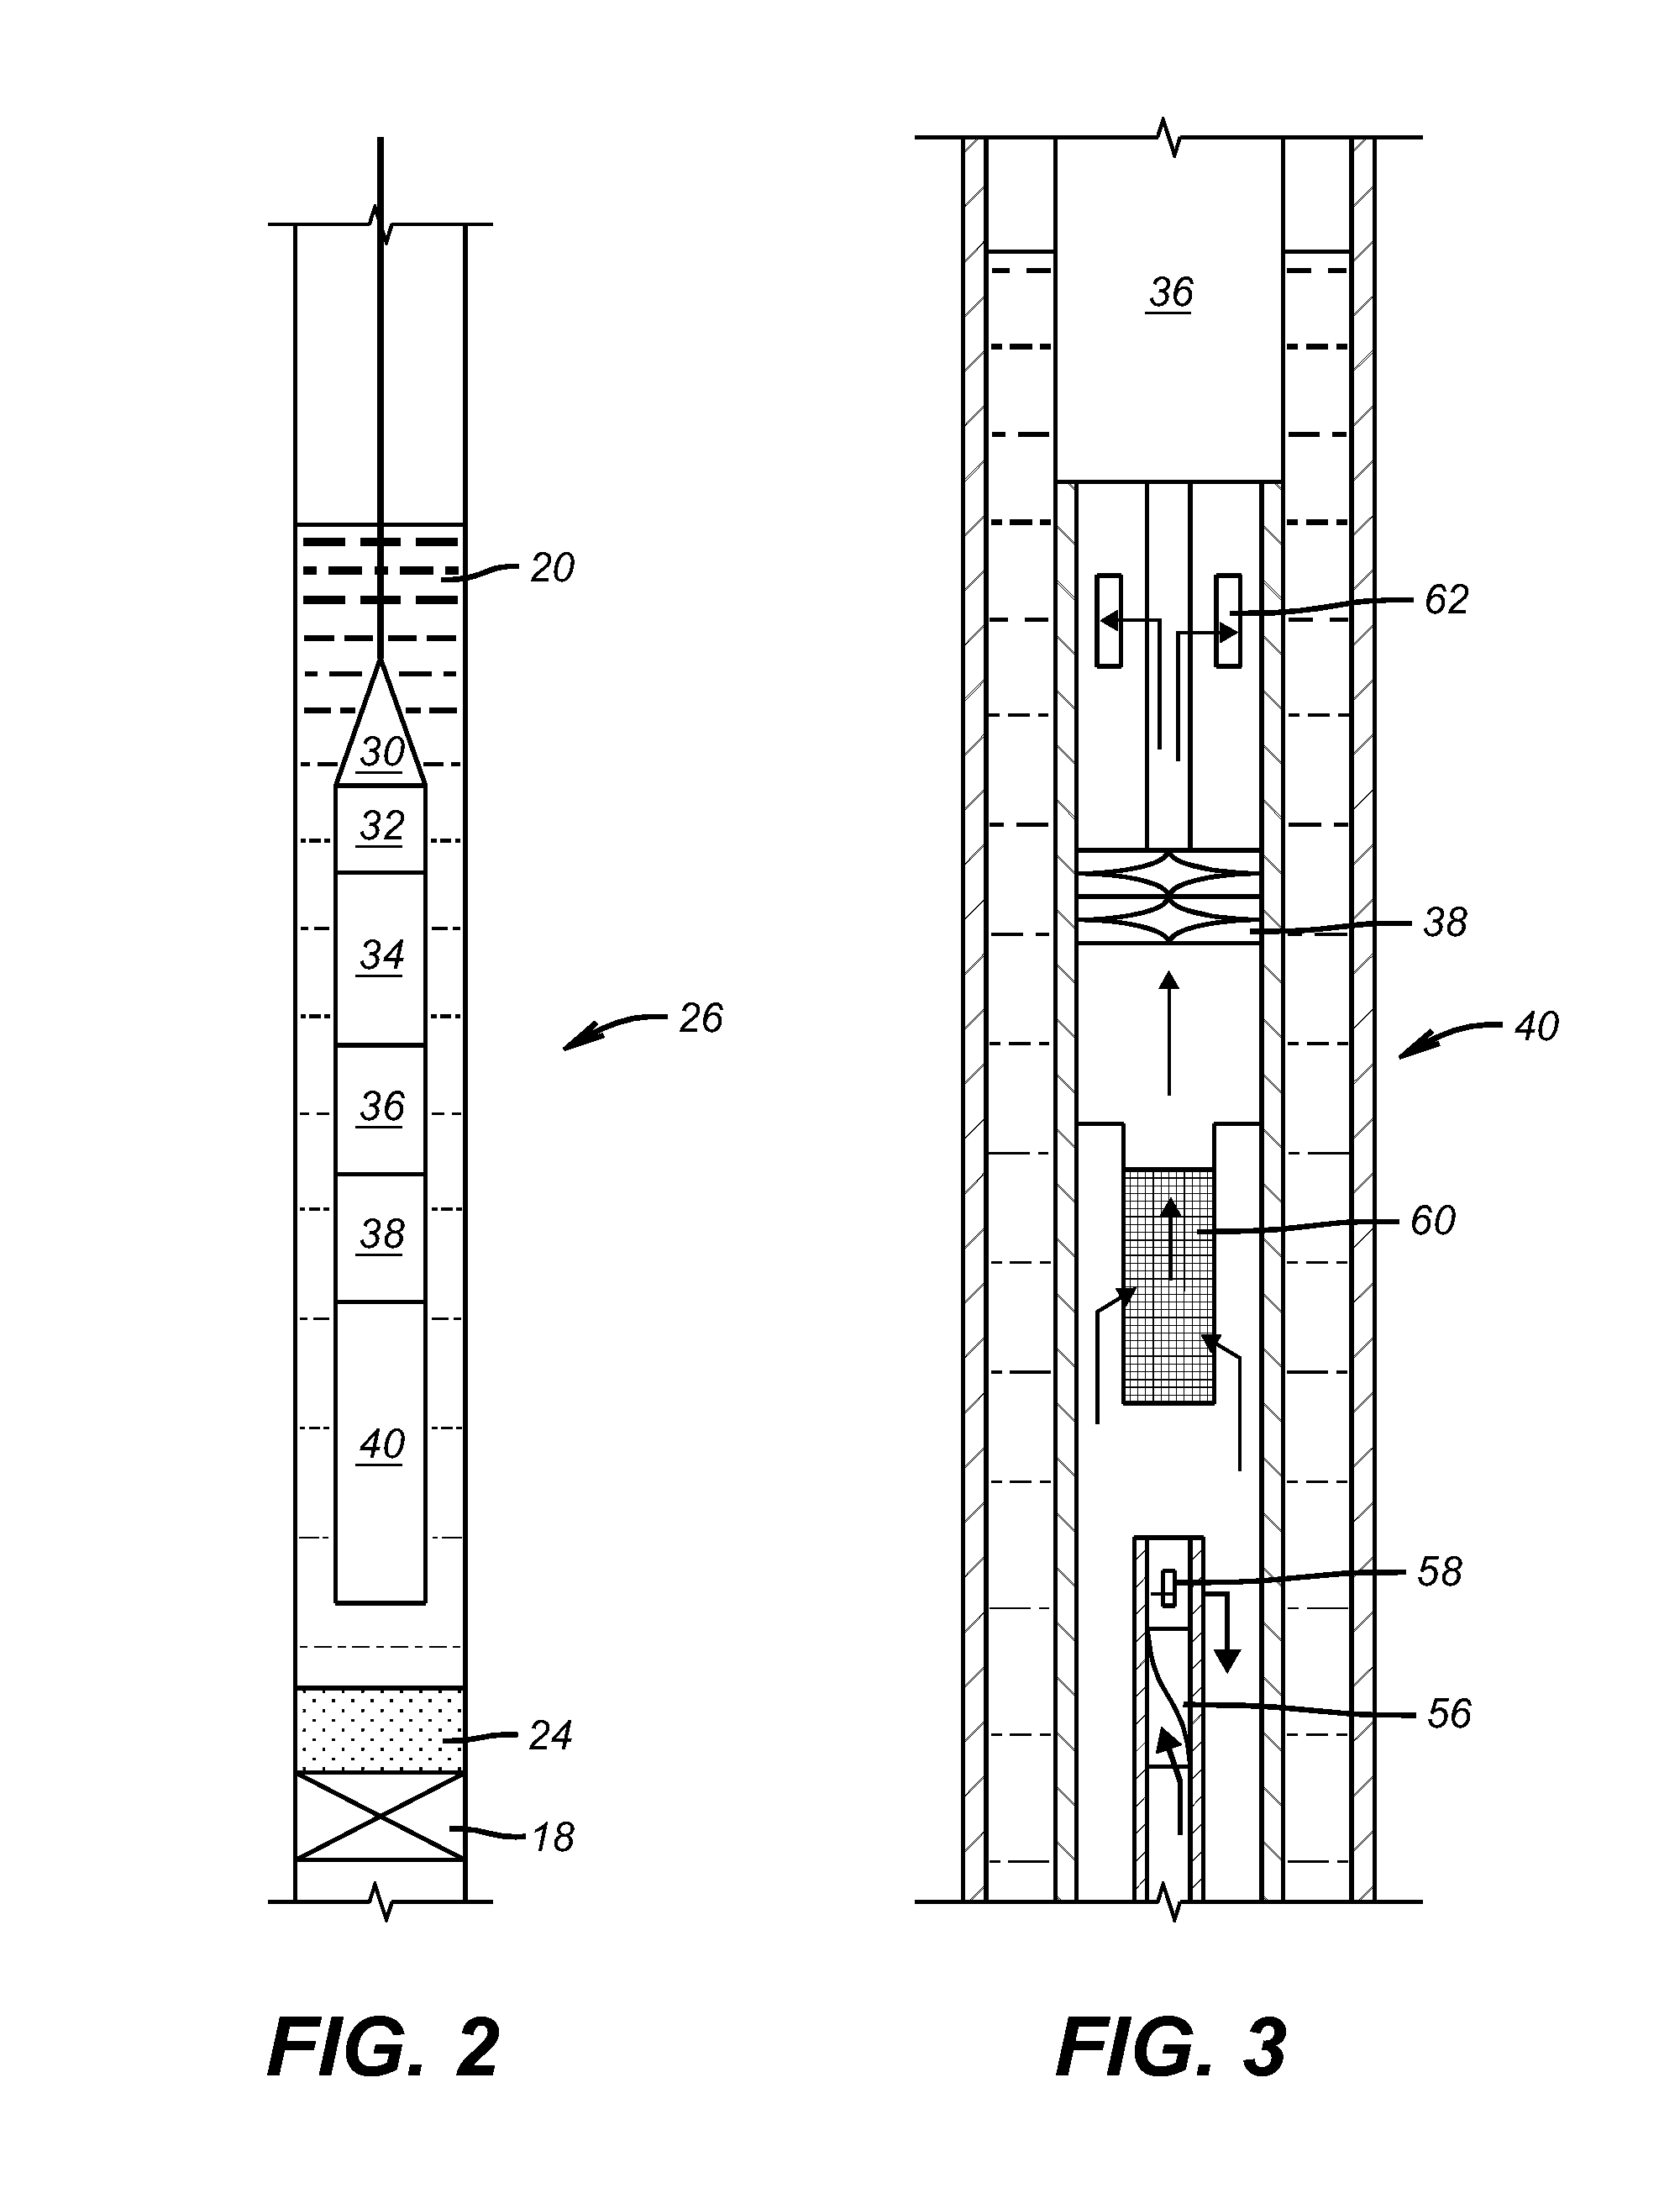 Slickline Conveyed Bottom Hole Assembly with Tractor